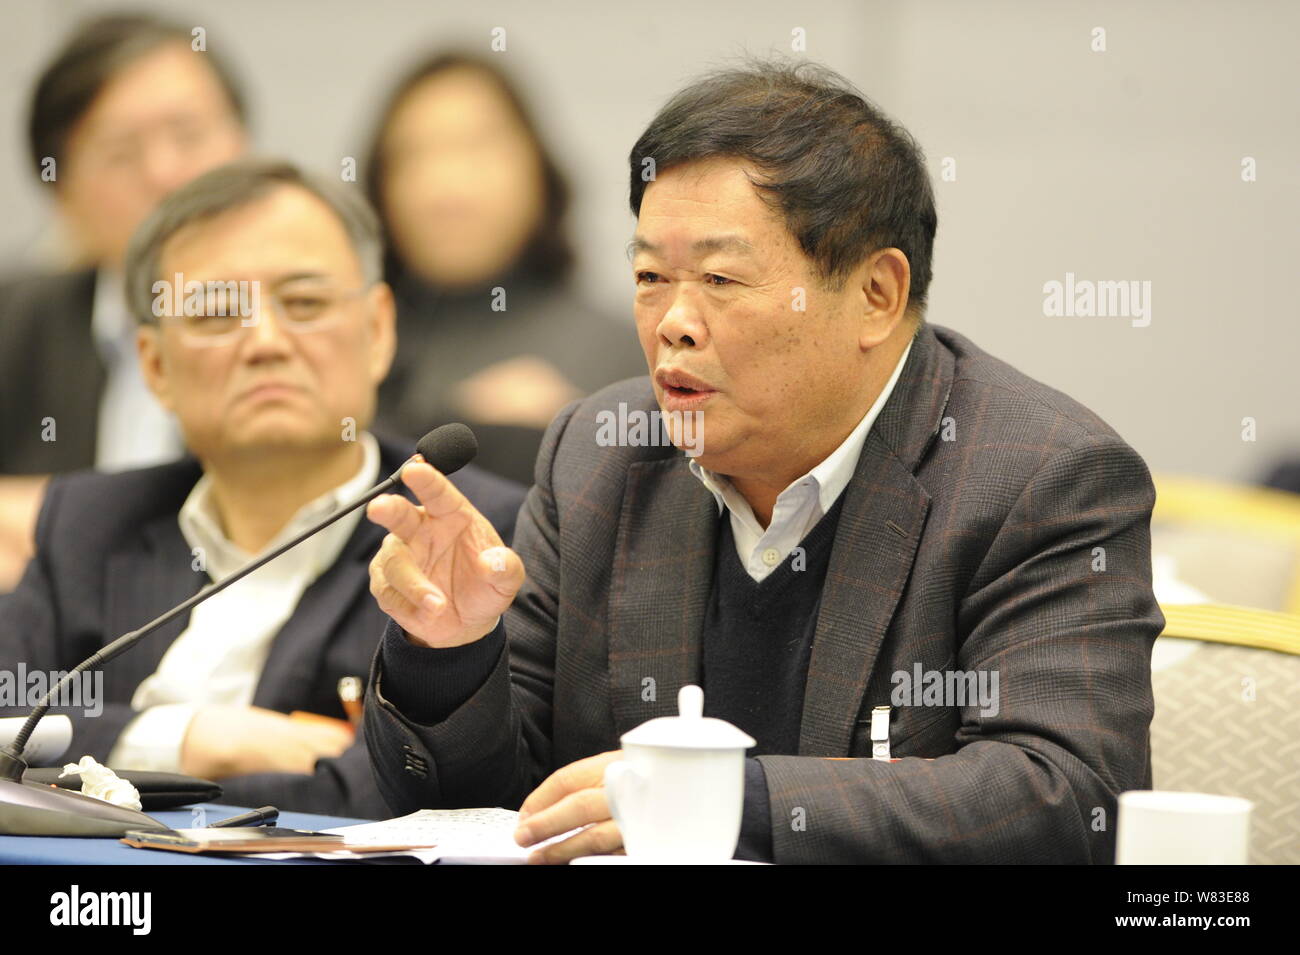 --FILE--Cho Tak Wong (Cao Dewang), Chairman of Fuyao Group and Chairman of Fuyao Glass Industry Group Co., attends a panel discussion during the Third Stock Photo